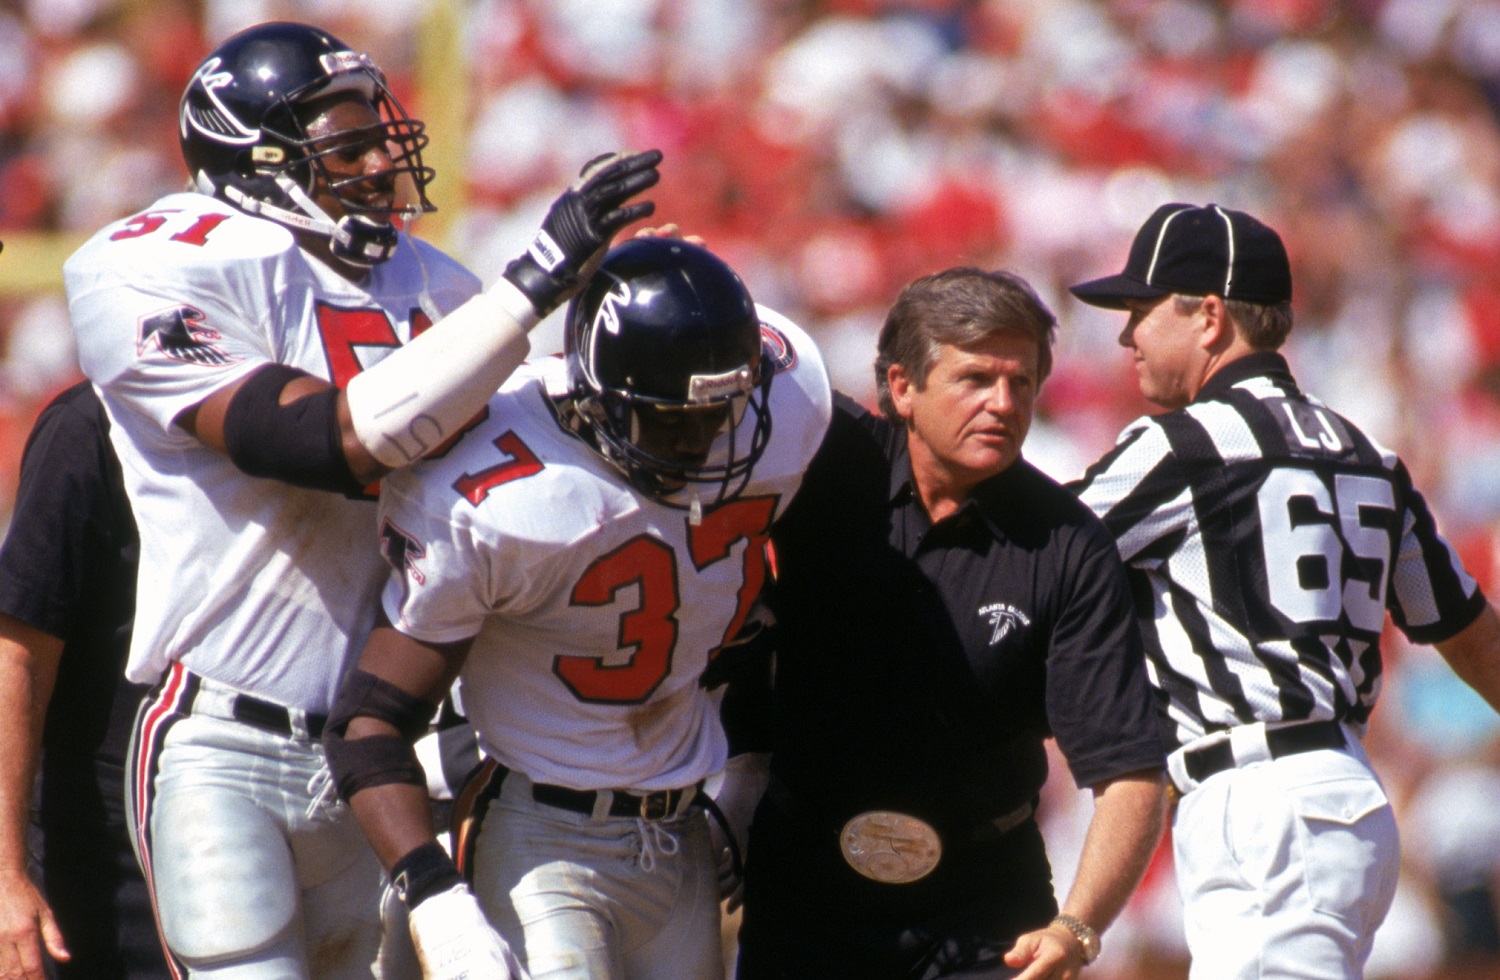 Cornerback Elbert Shelley gets help off the field from coach Jerry Glanville during a game against the San Francisco 49ers at Candlestick Park on Sept. 23, 1990. | George Rose/Getty Images